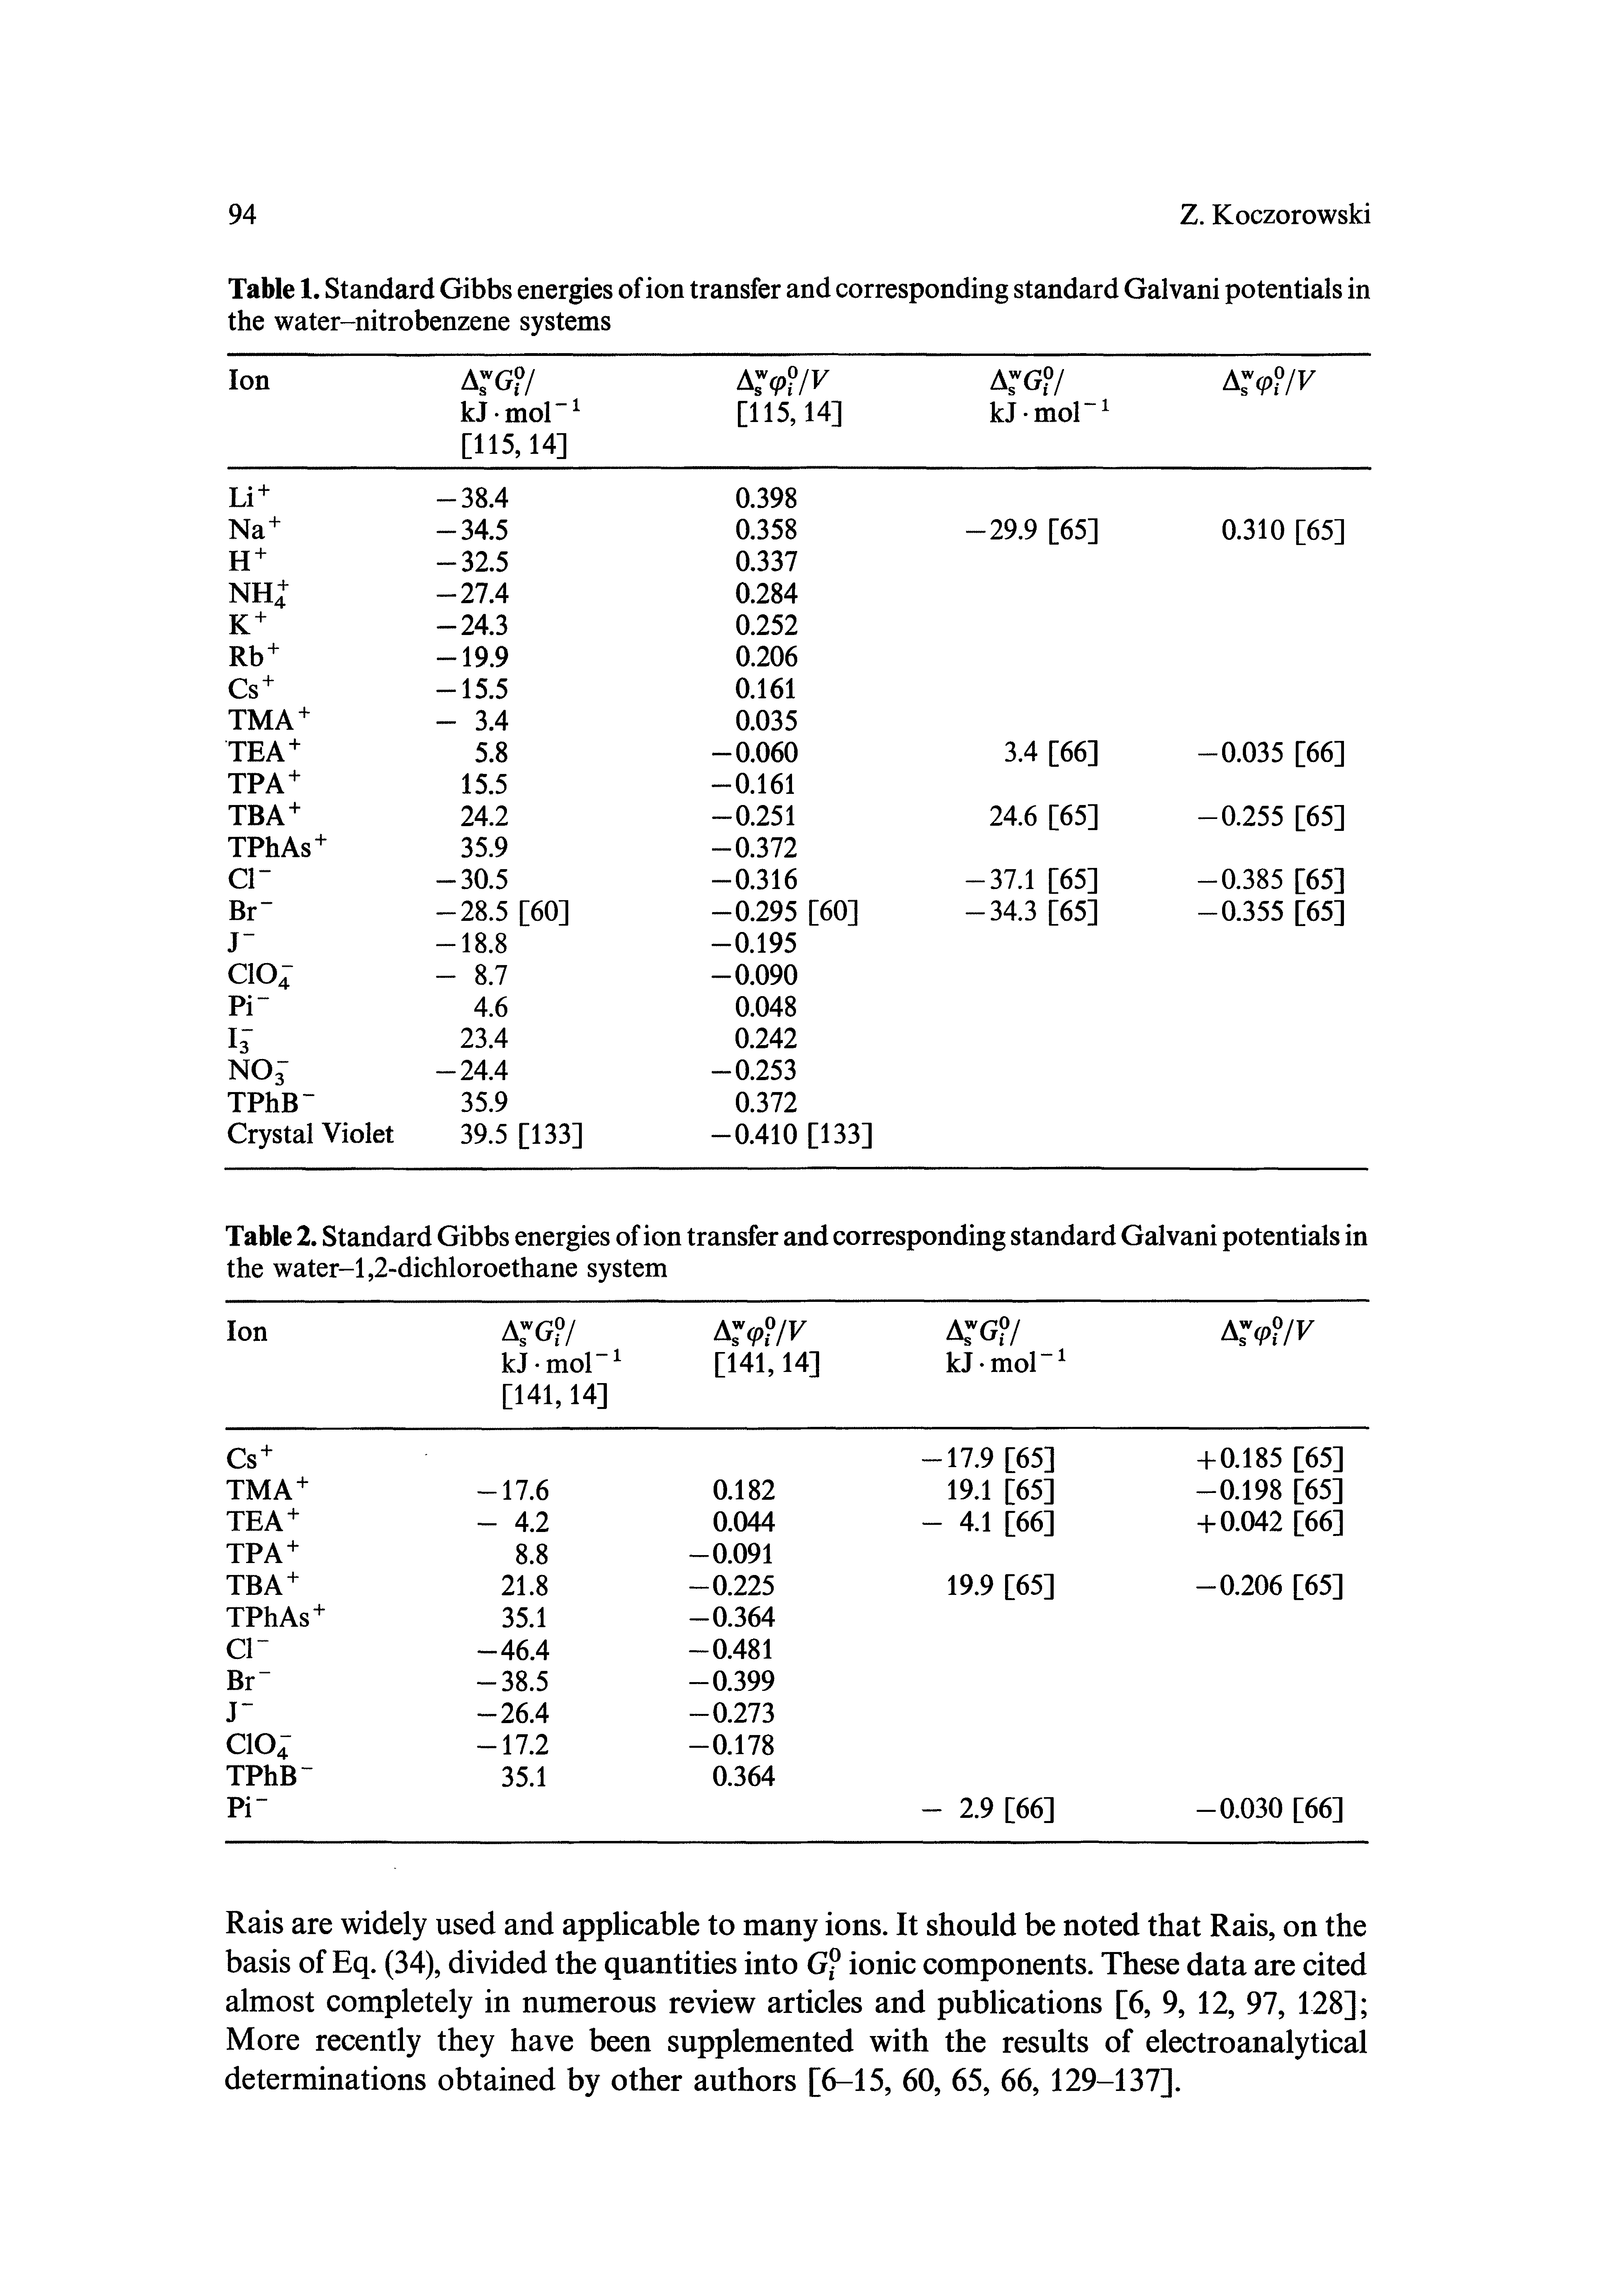 Table 1. Standard Gibbs energies of ion transfer and corresponding standard Galvani potentials in the water-nitrobenzene systems...